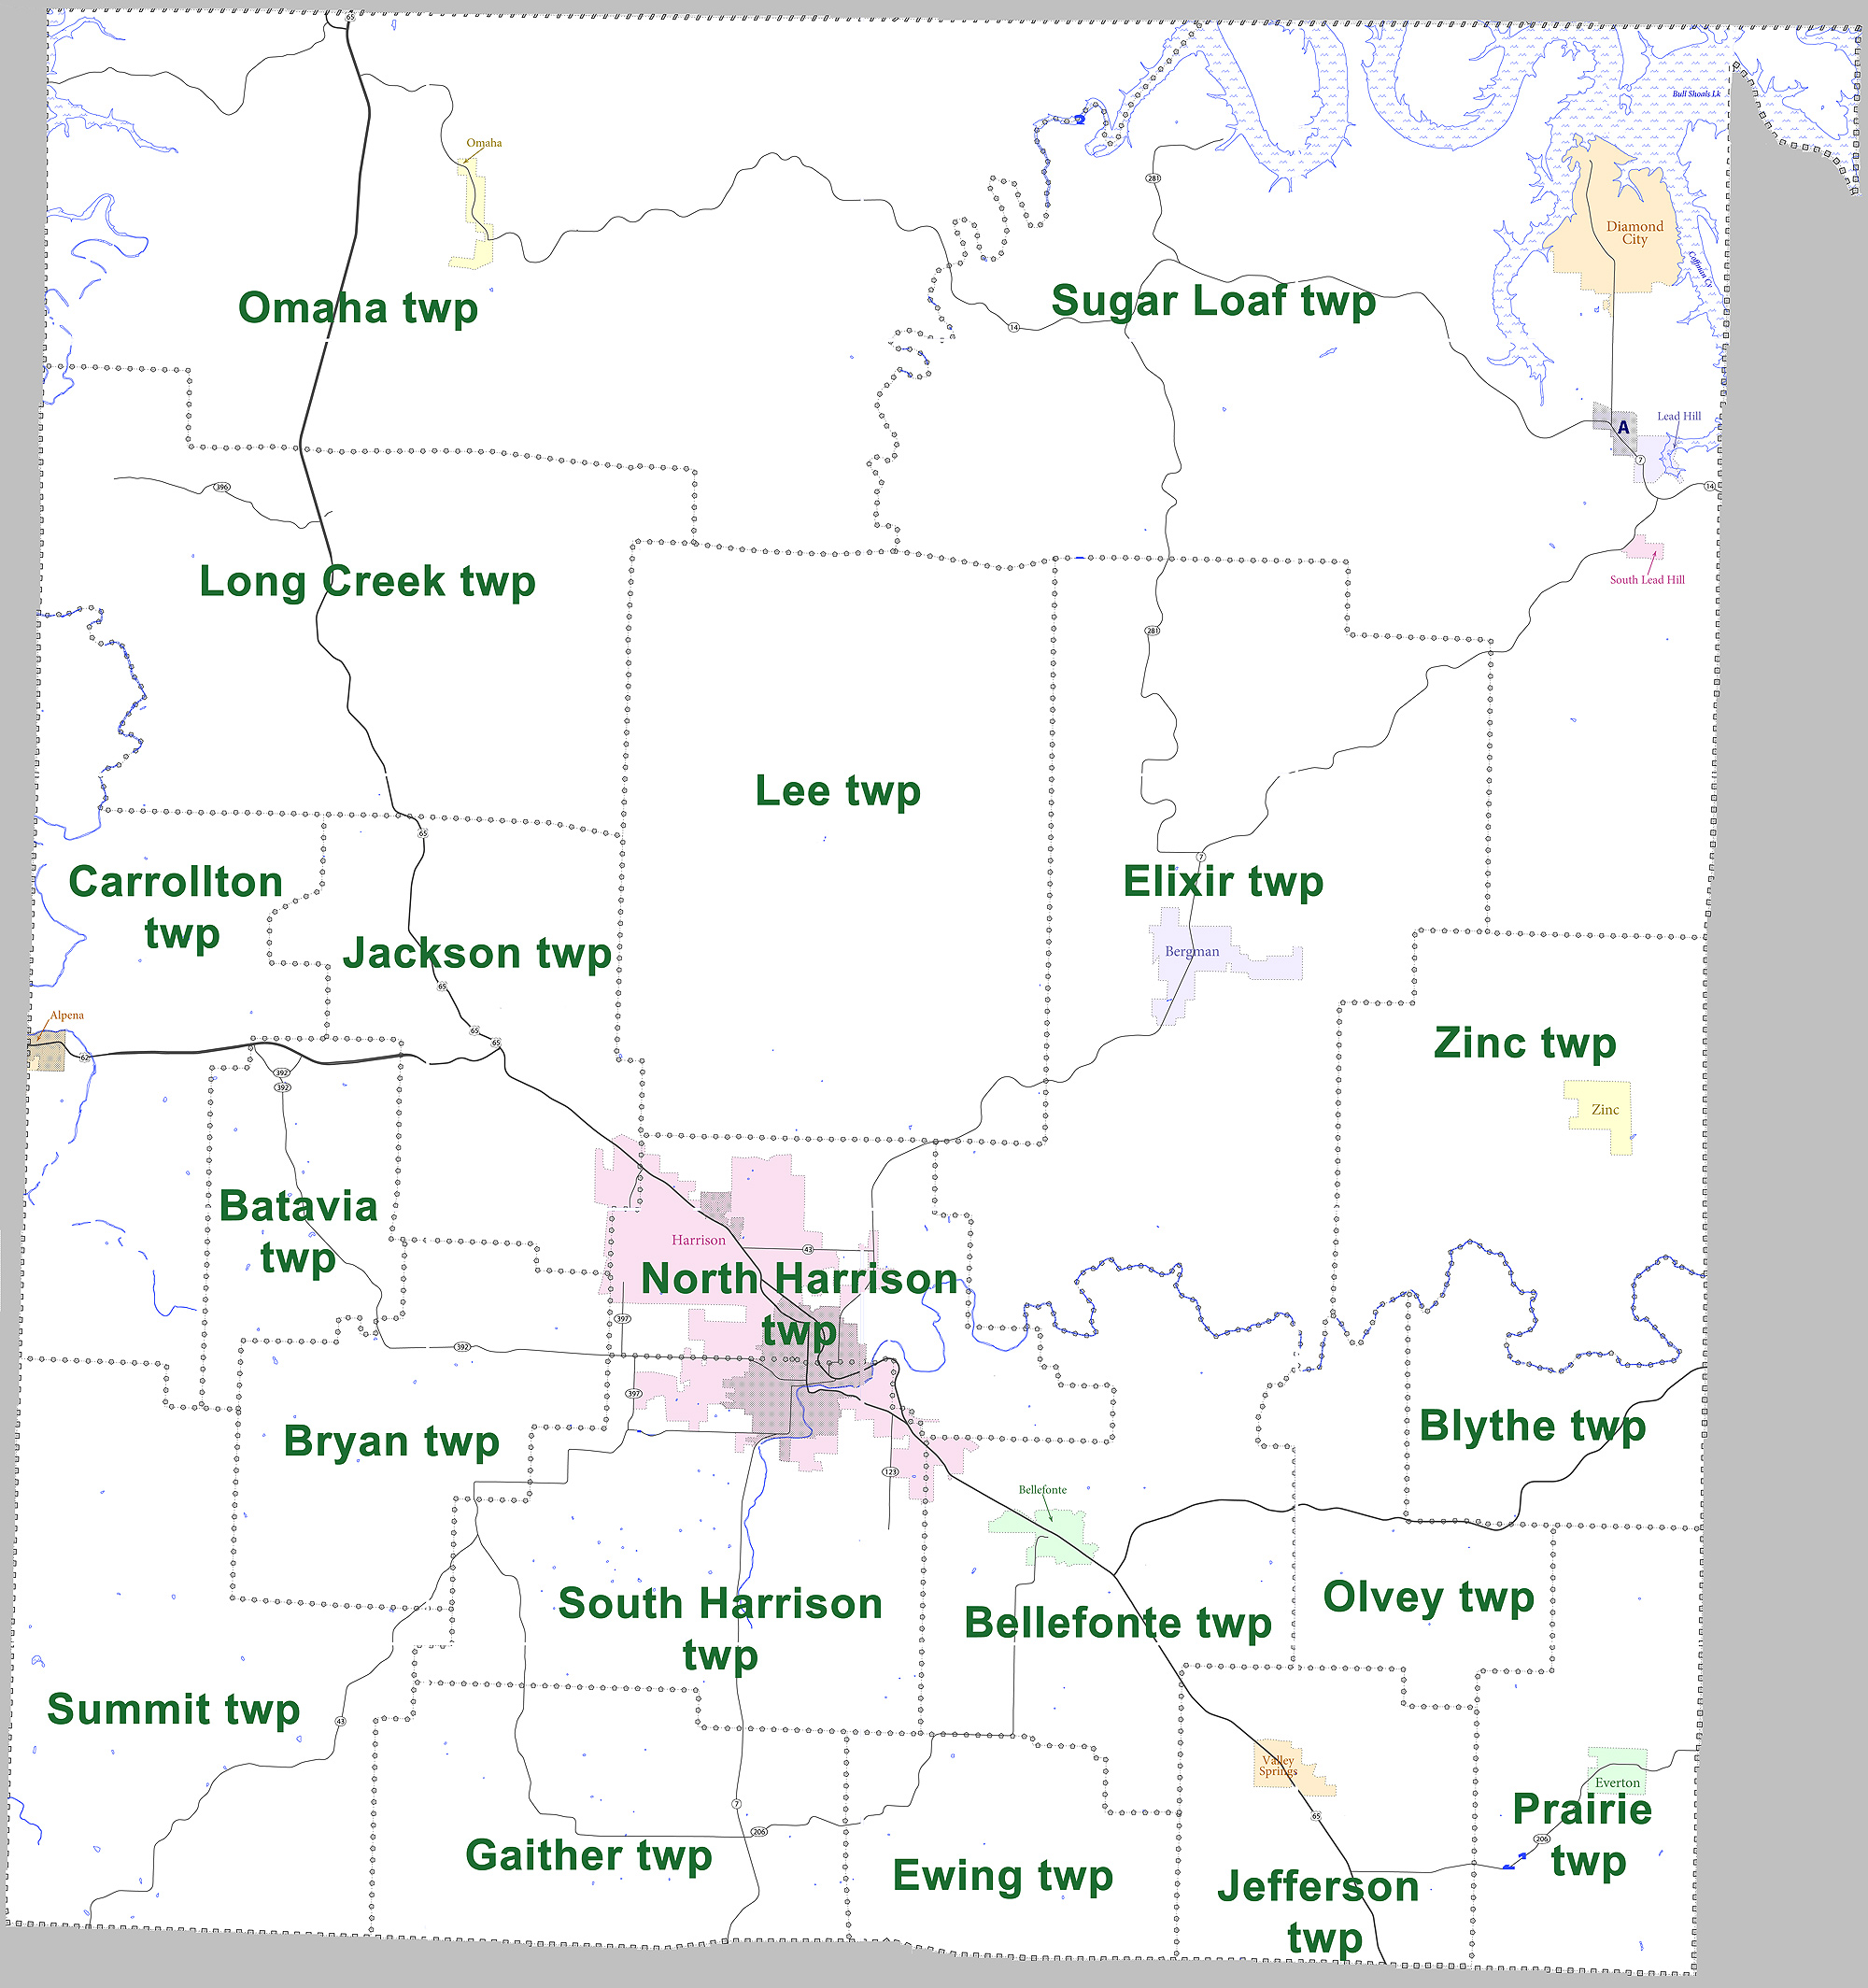 Boone_County_Arkansas_Townships_2010_large